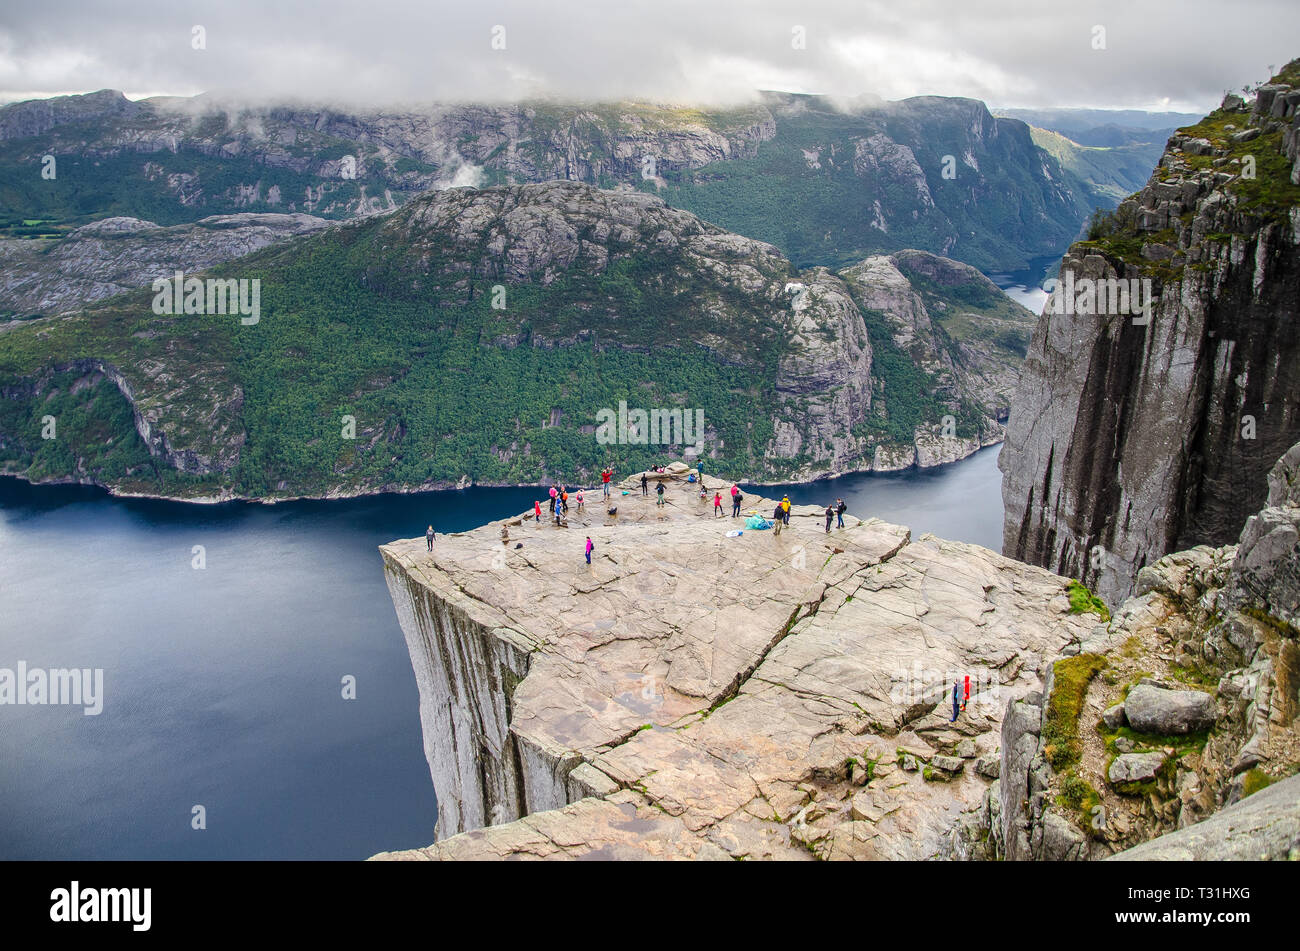 View of people walking on Preikestolen Pulpit Rock from above with a fjord underneath. Stock Photo